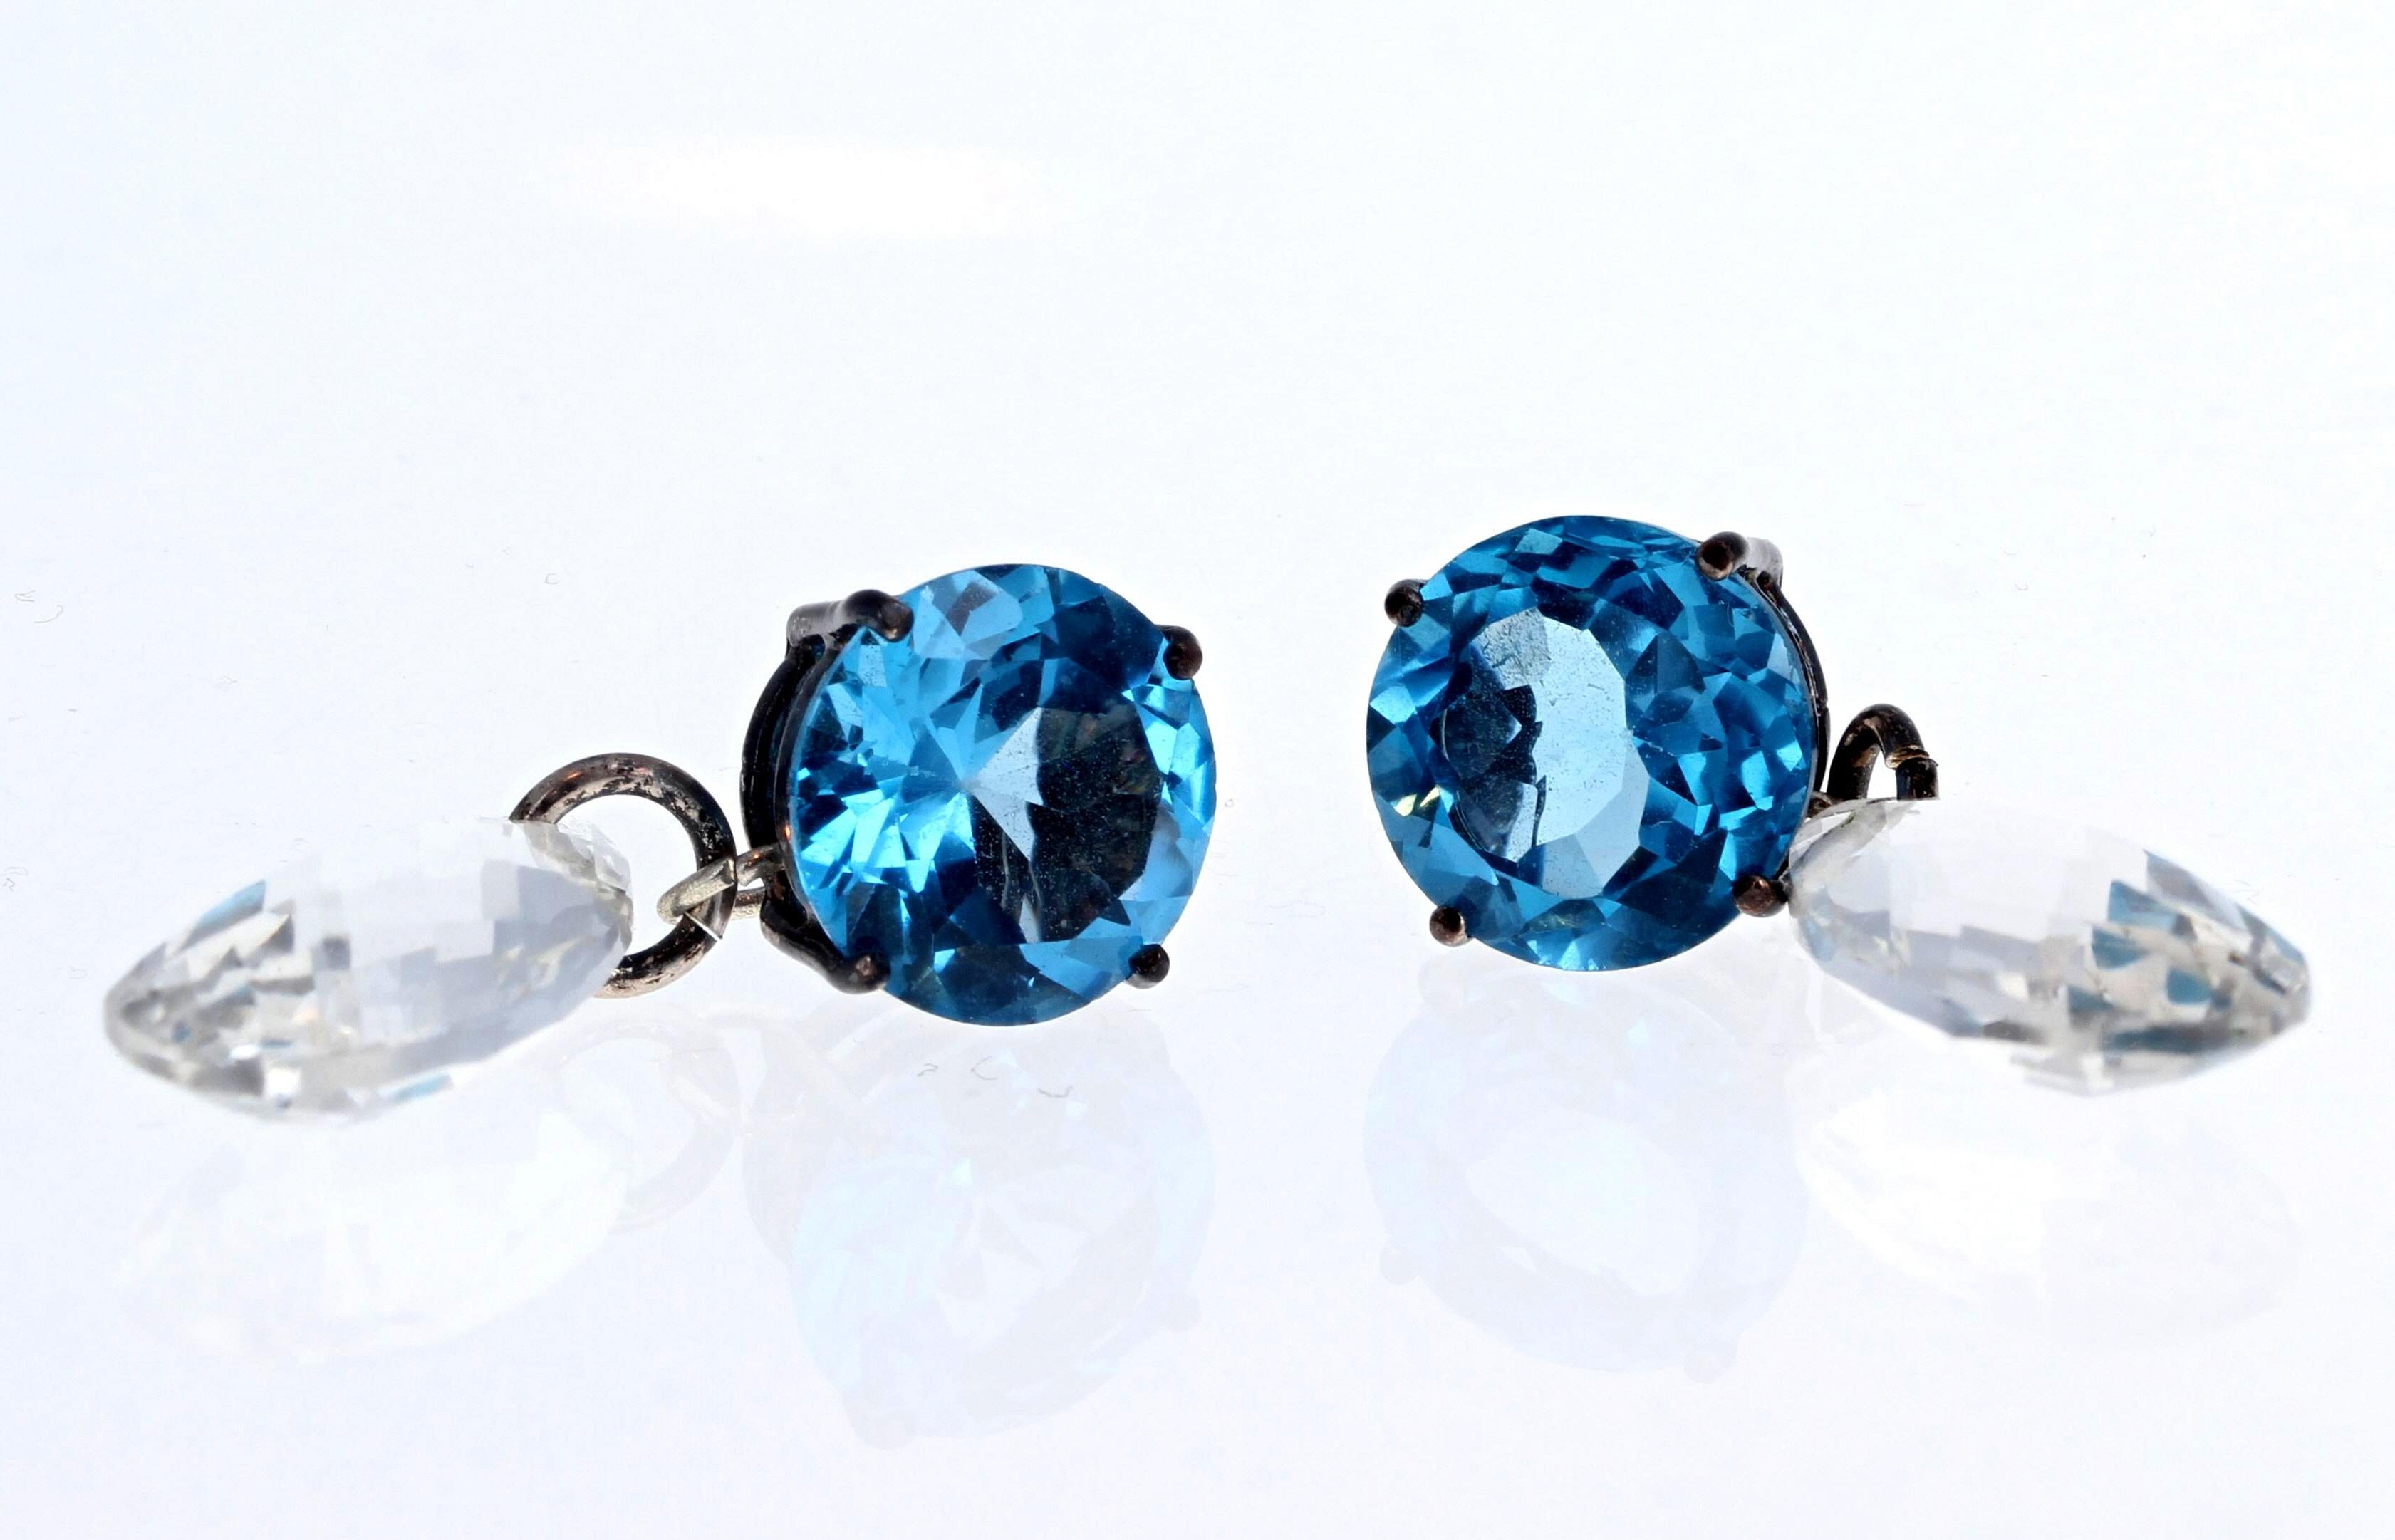 Mixed Cut AJD Fascinating Intense Blue Topaz & Natural Clear White Gemcut Topaz Earrings For Sale